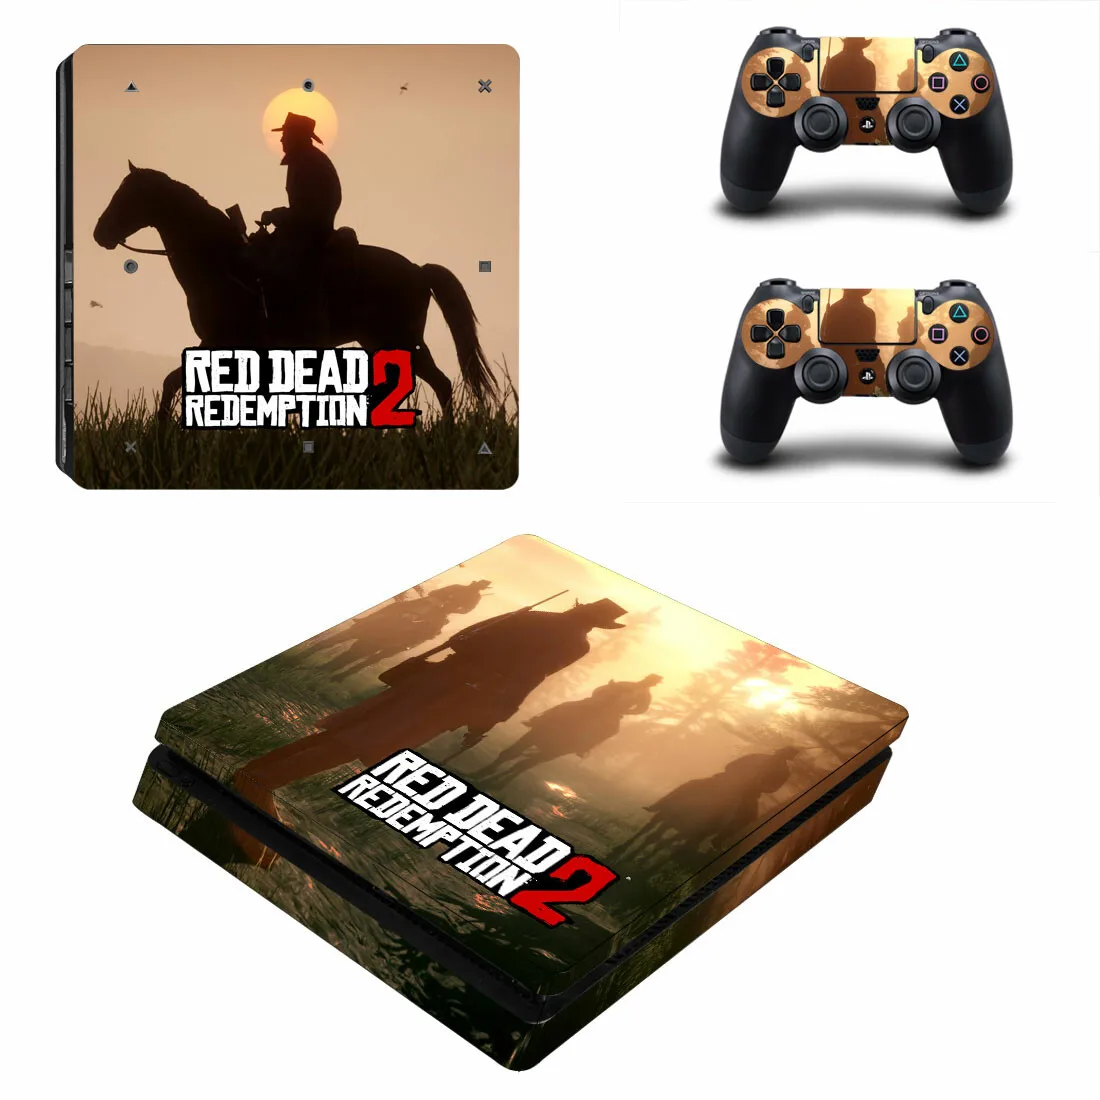 Game Red Dead Ps4 Slim Skin Sticker For Playstation 4 Console And Controllers Skins Sticker Decal Vinyl Stickers - AliExpress